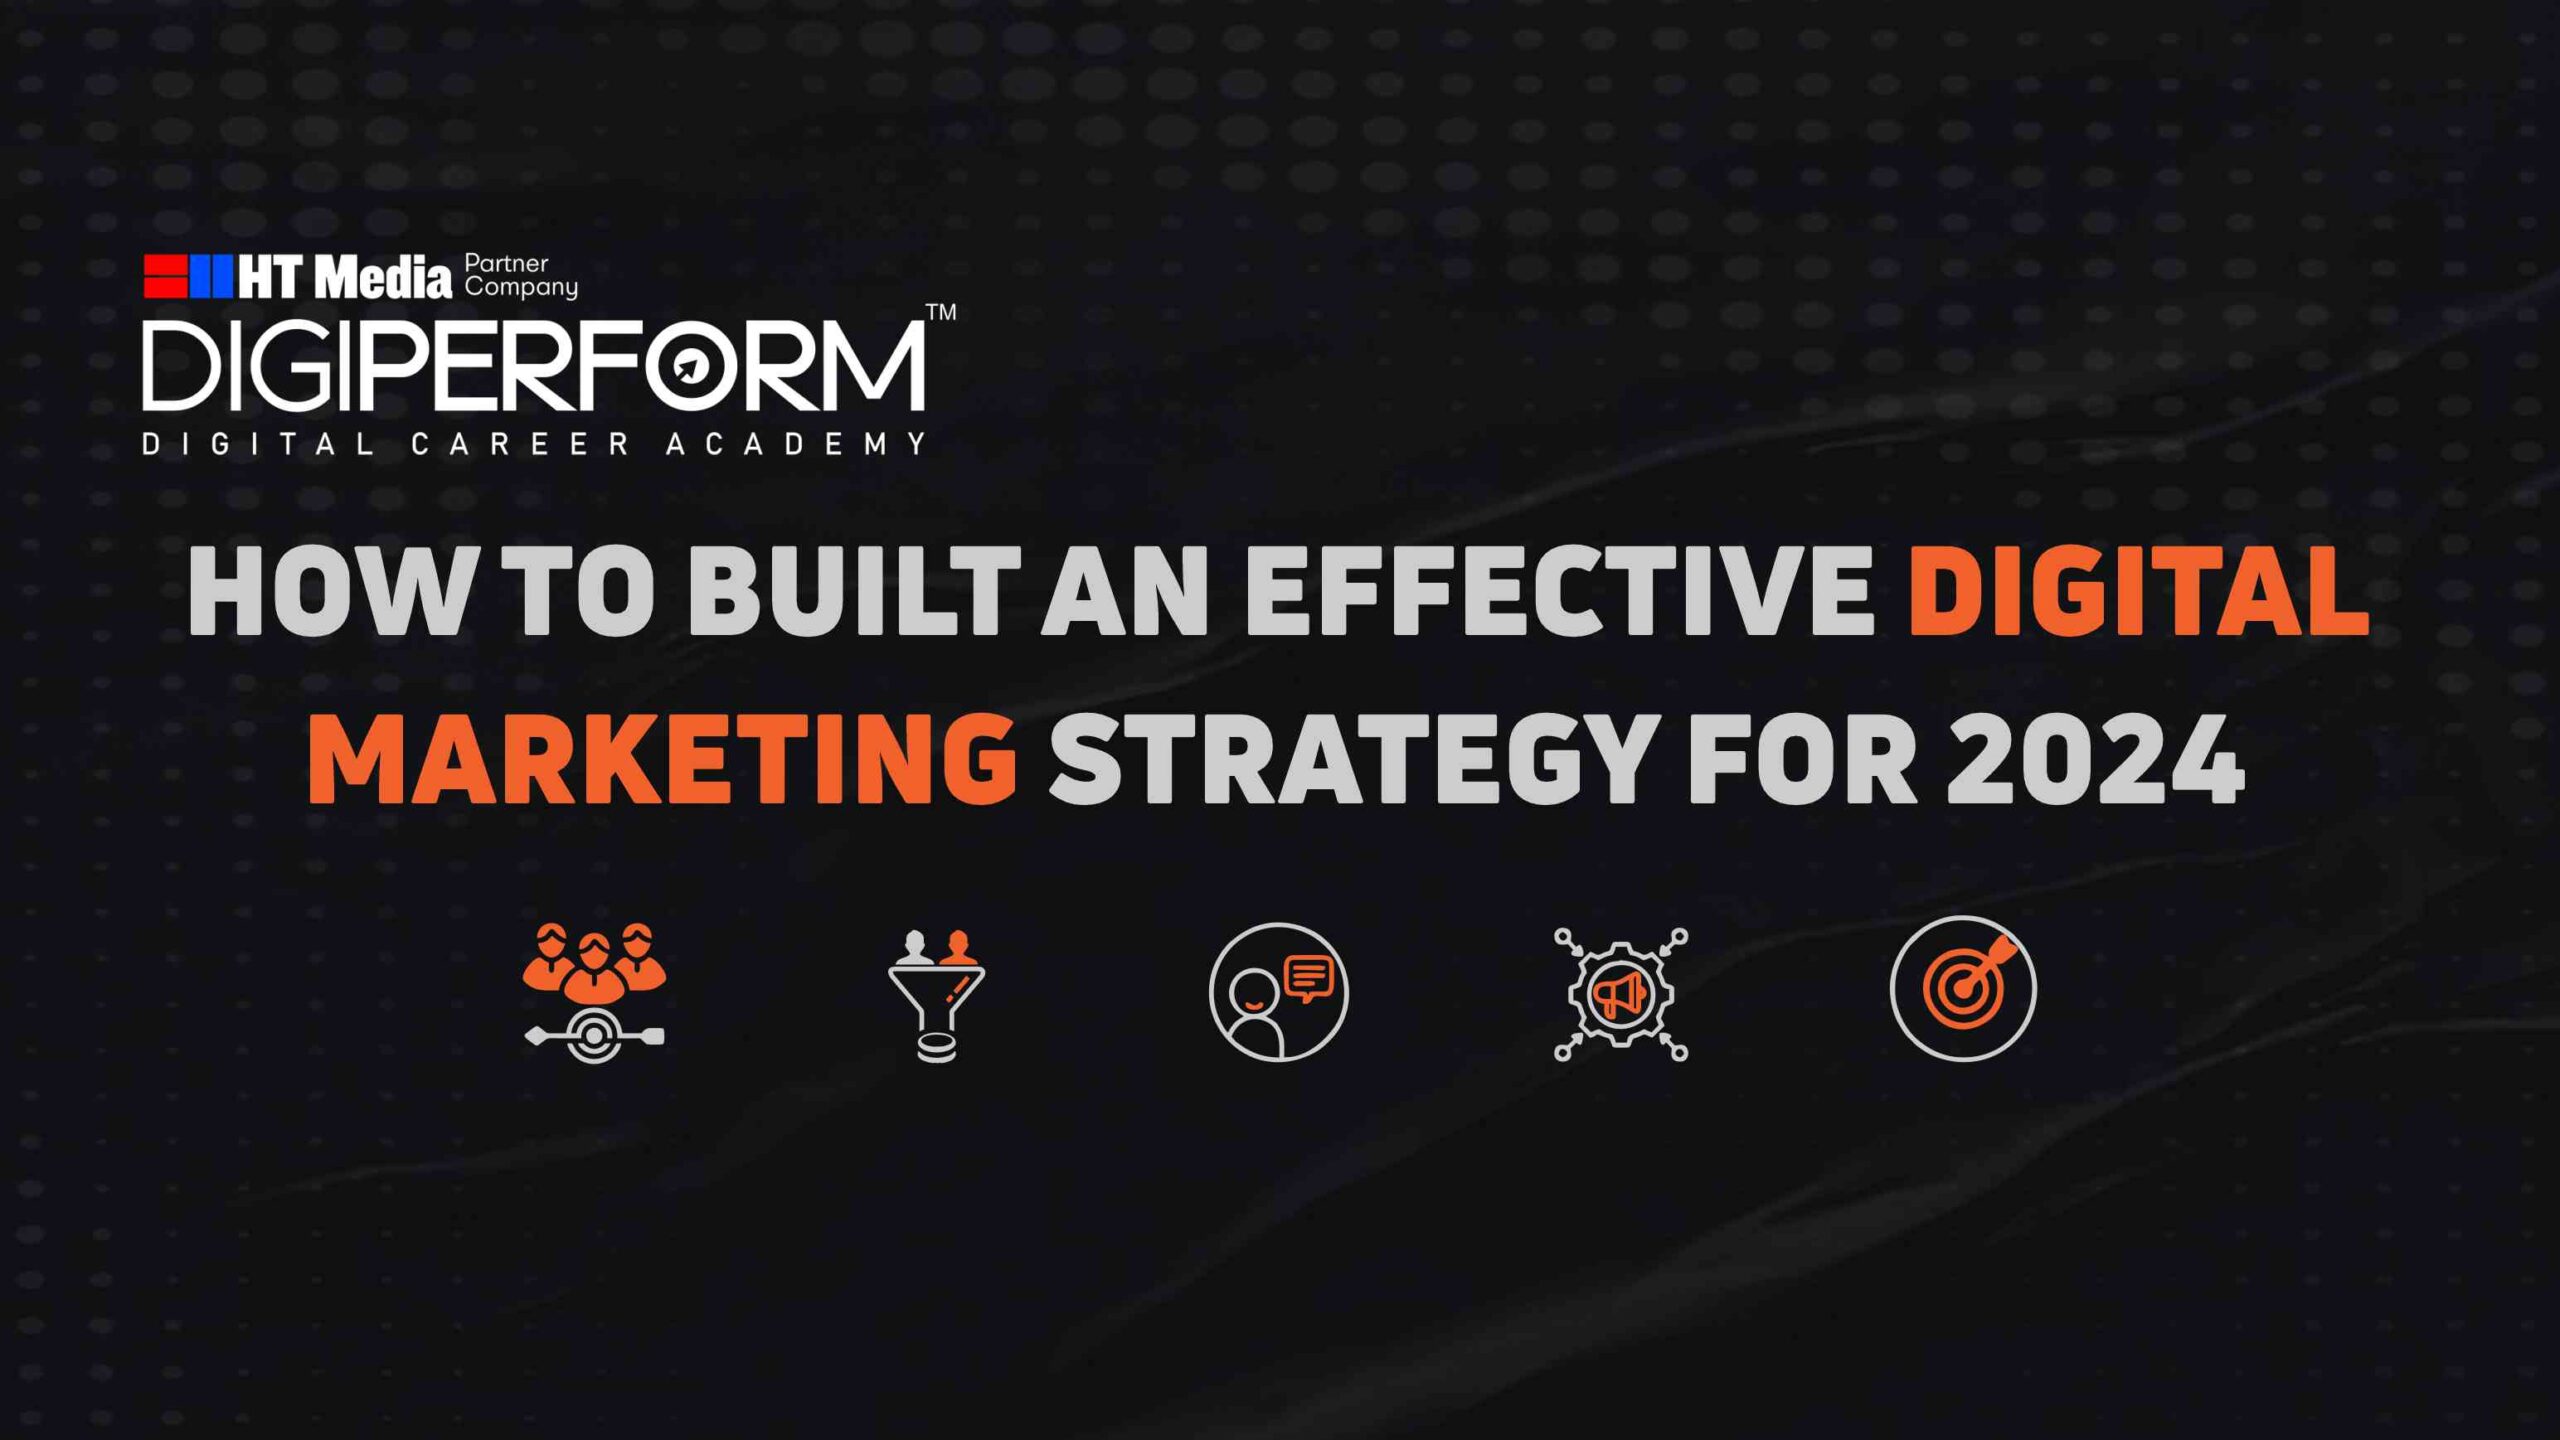 How To Built An Effective Digital Marketing Strategy For 2024